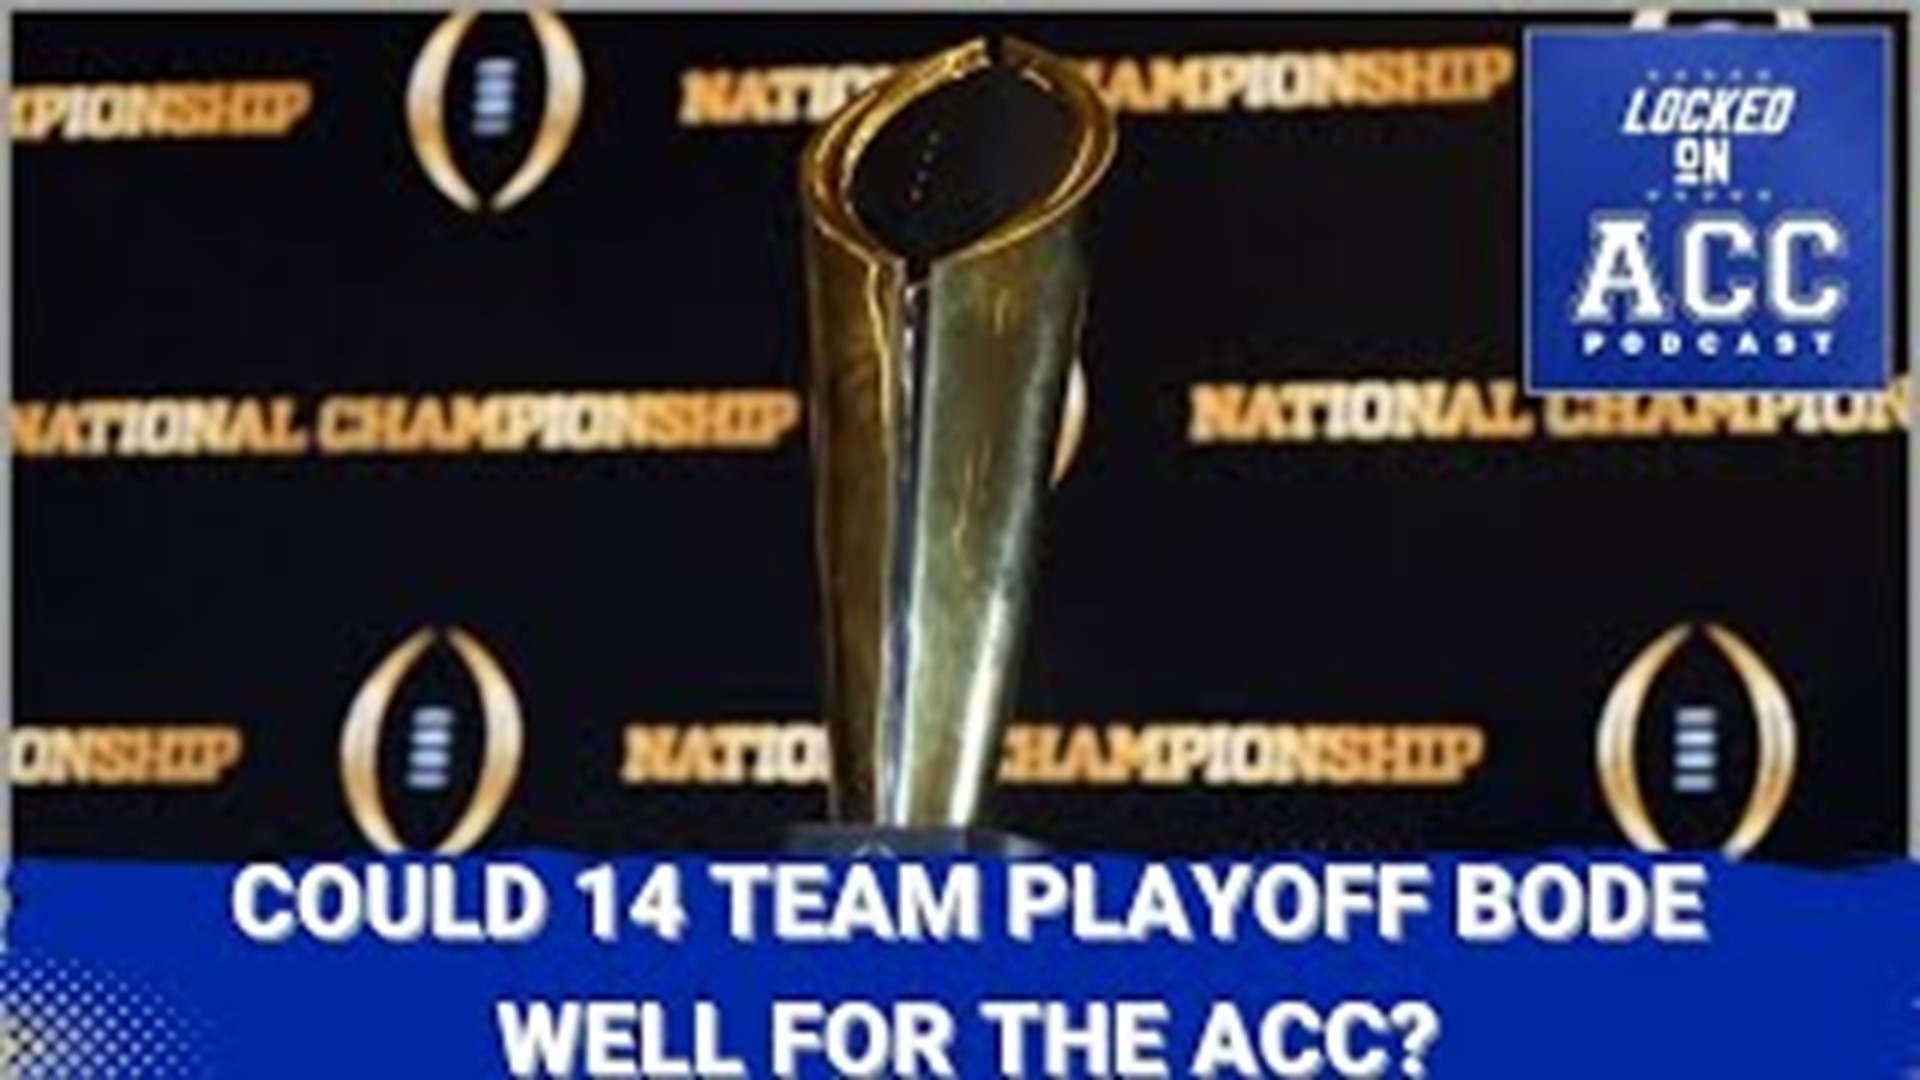 In this episode, Candace and Kenton talk playoff expansion and the ACC tourney.